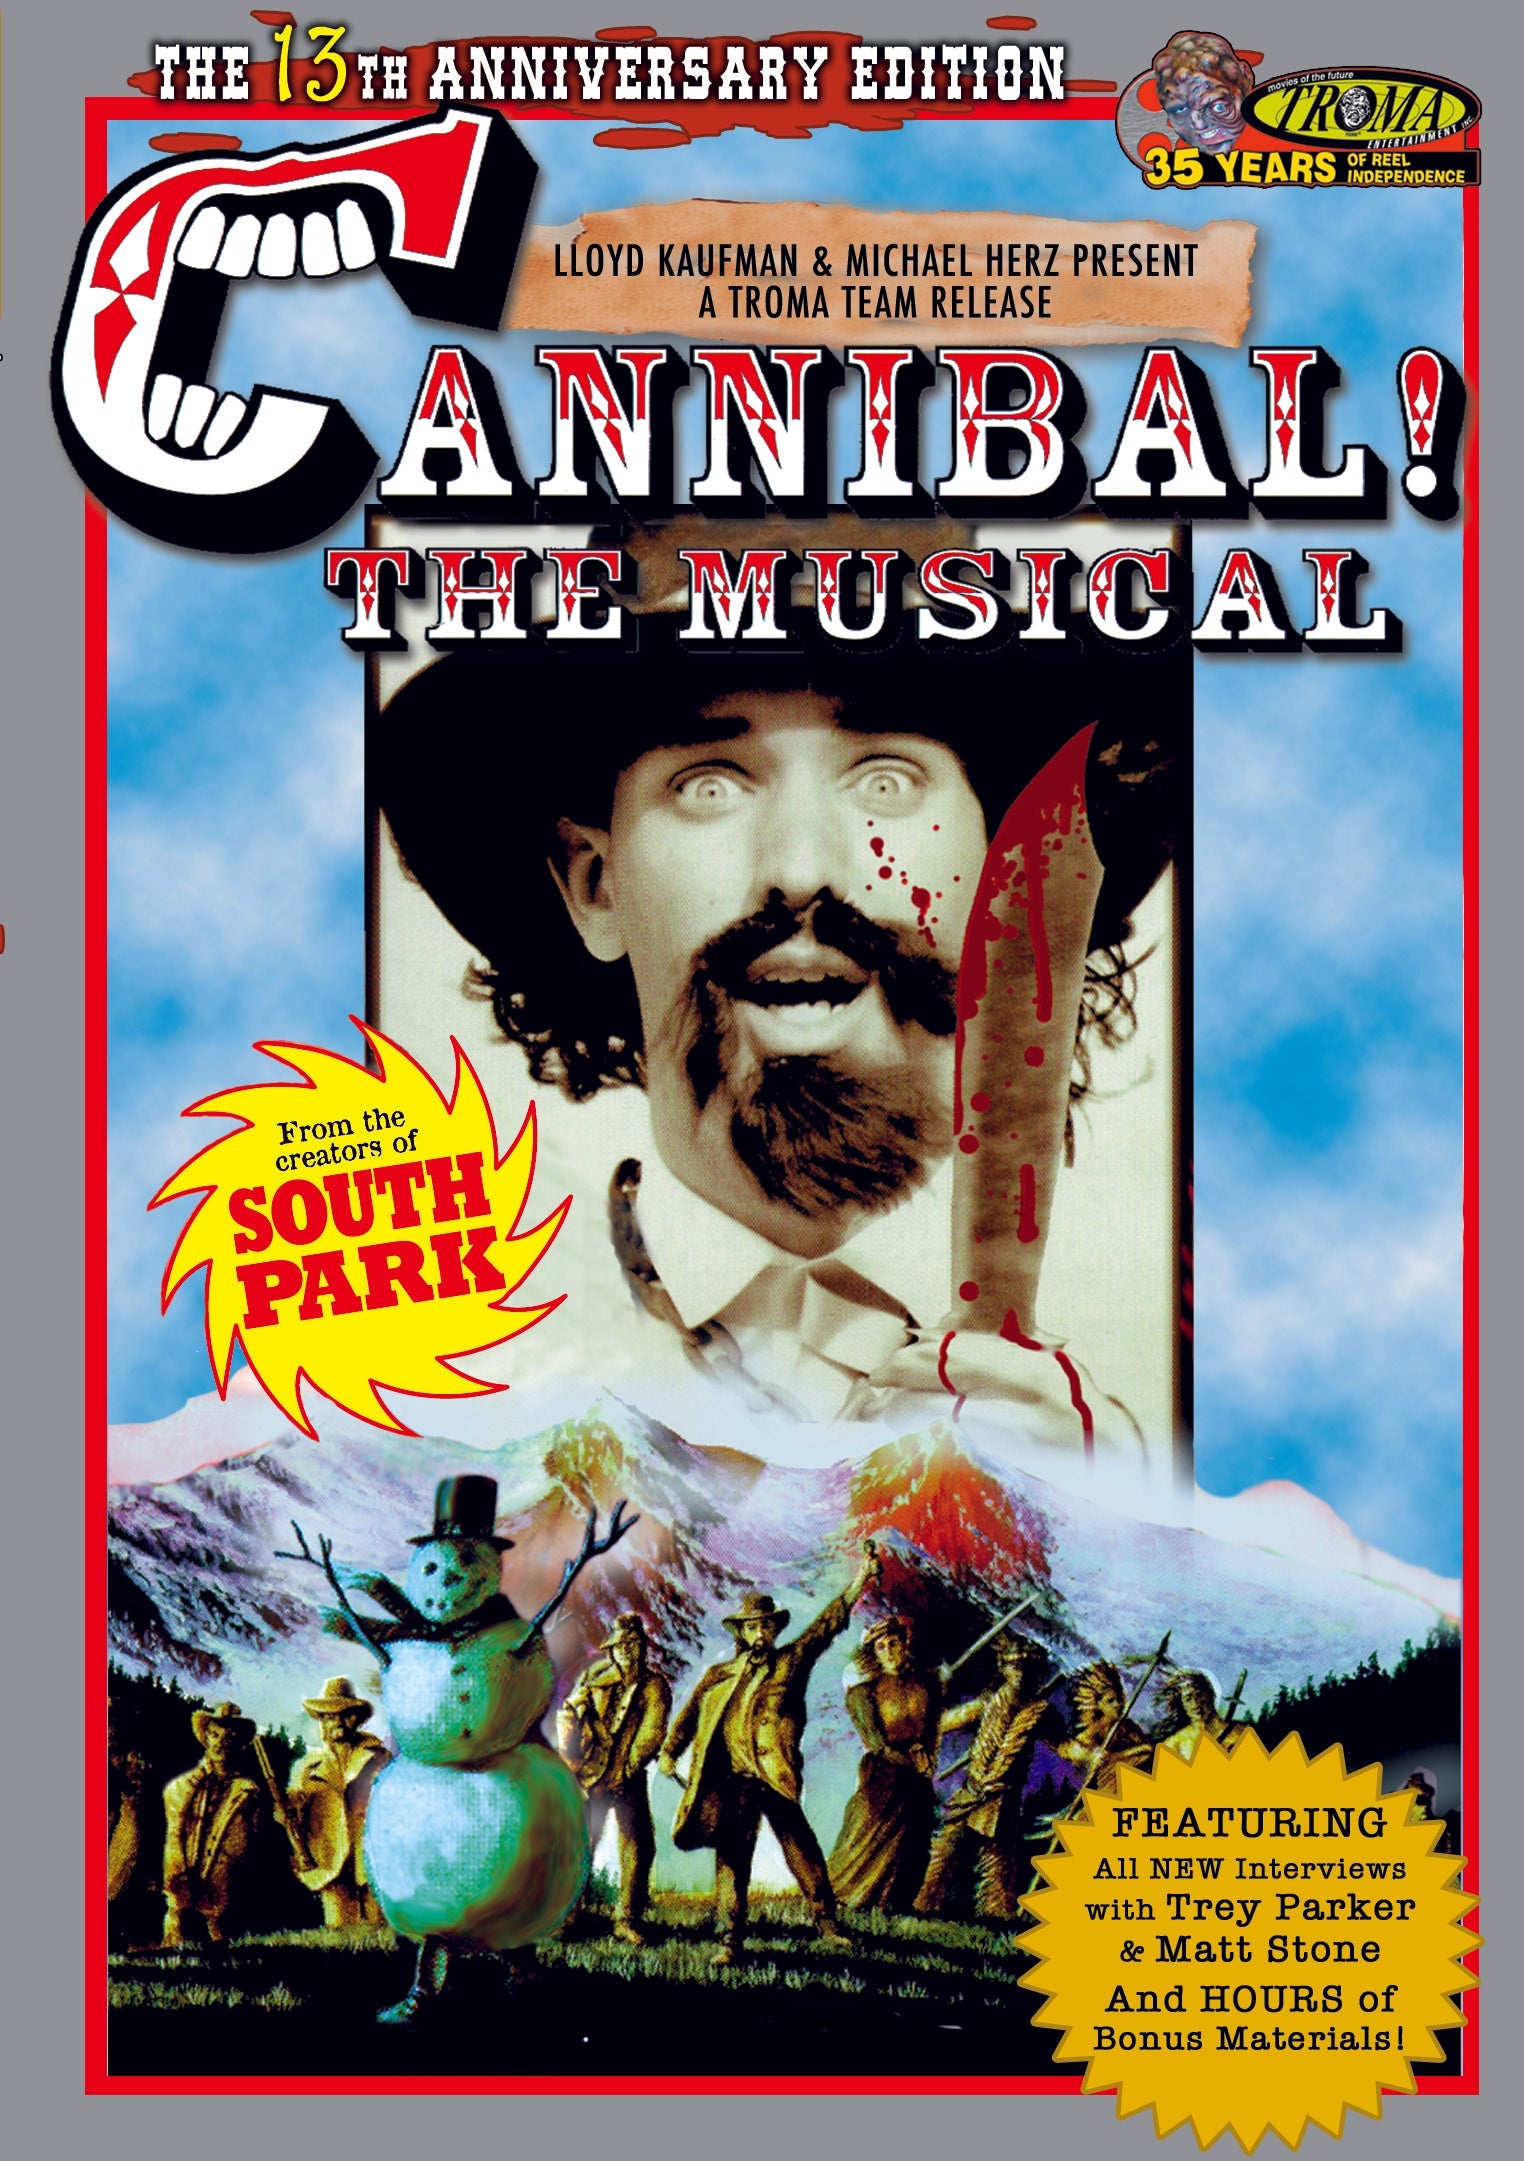 Cannibal! The Musical Umd (Psp - Playstation Portable) Dvd